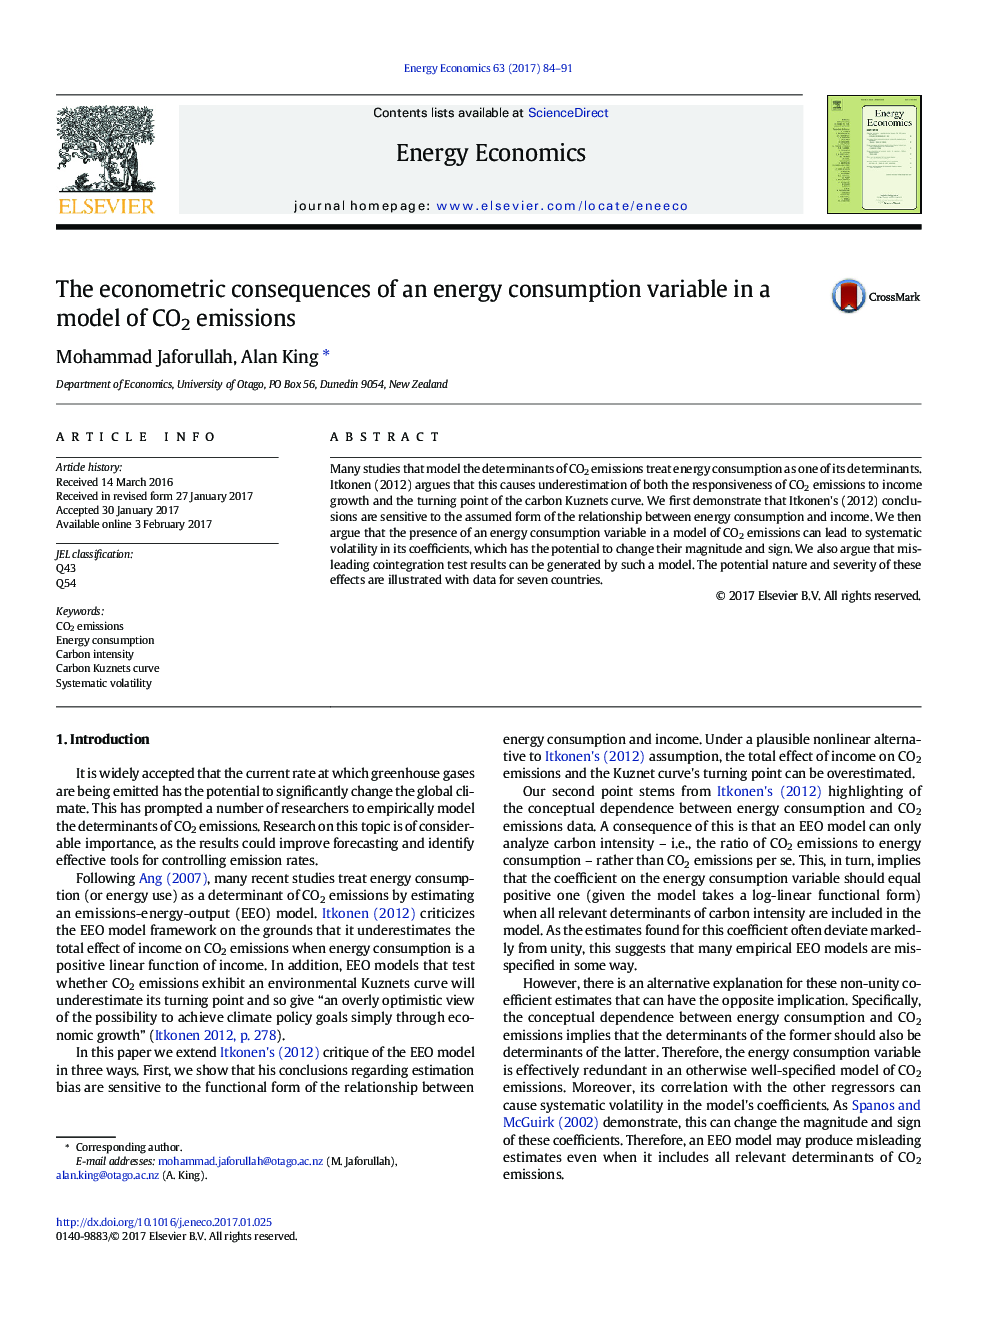 The econometric consequences of an energy consumption variable in a model of CO2 emissions